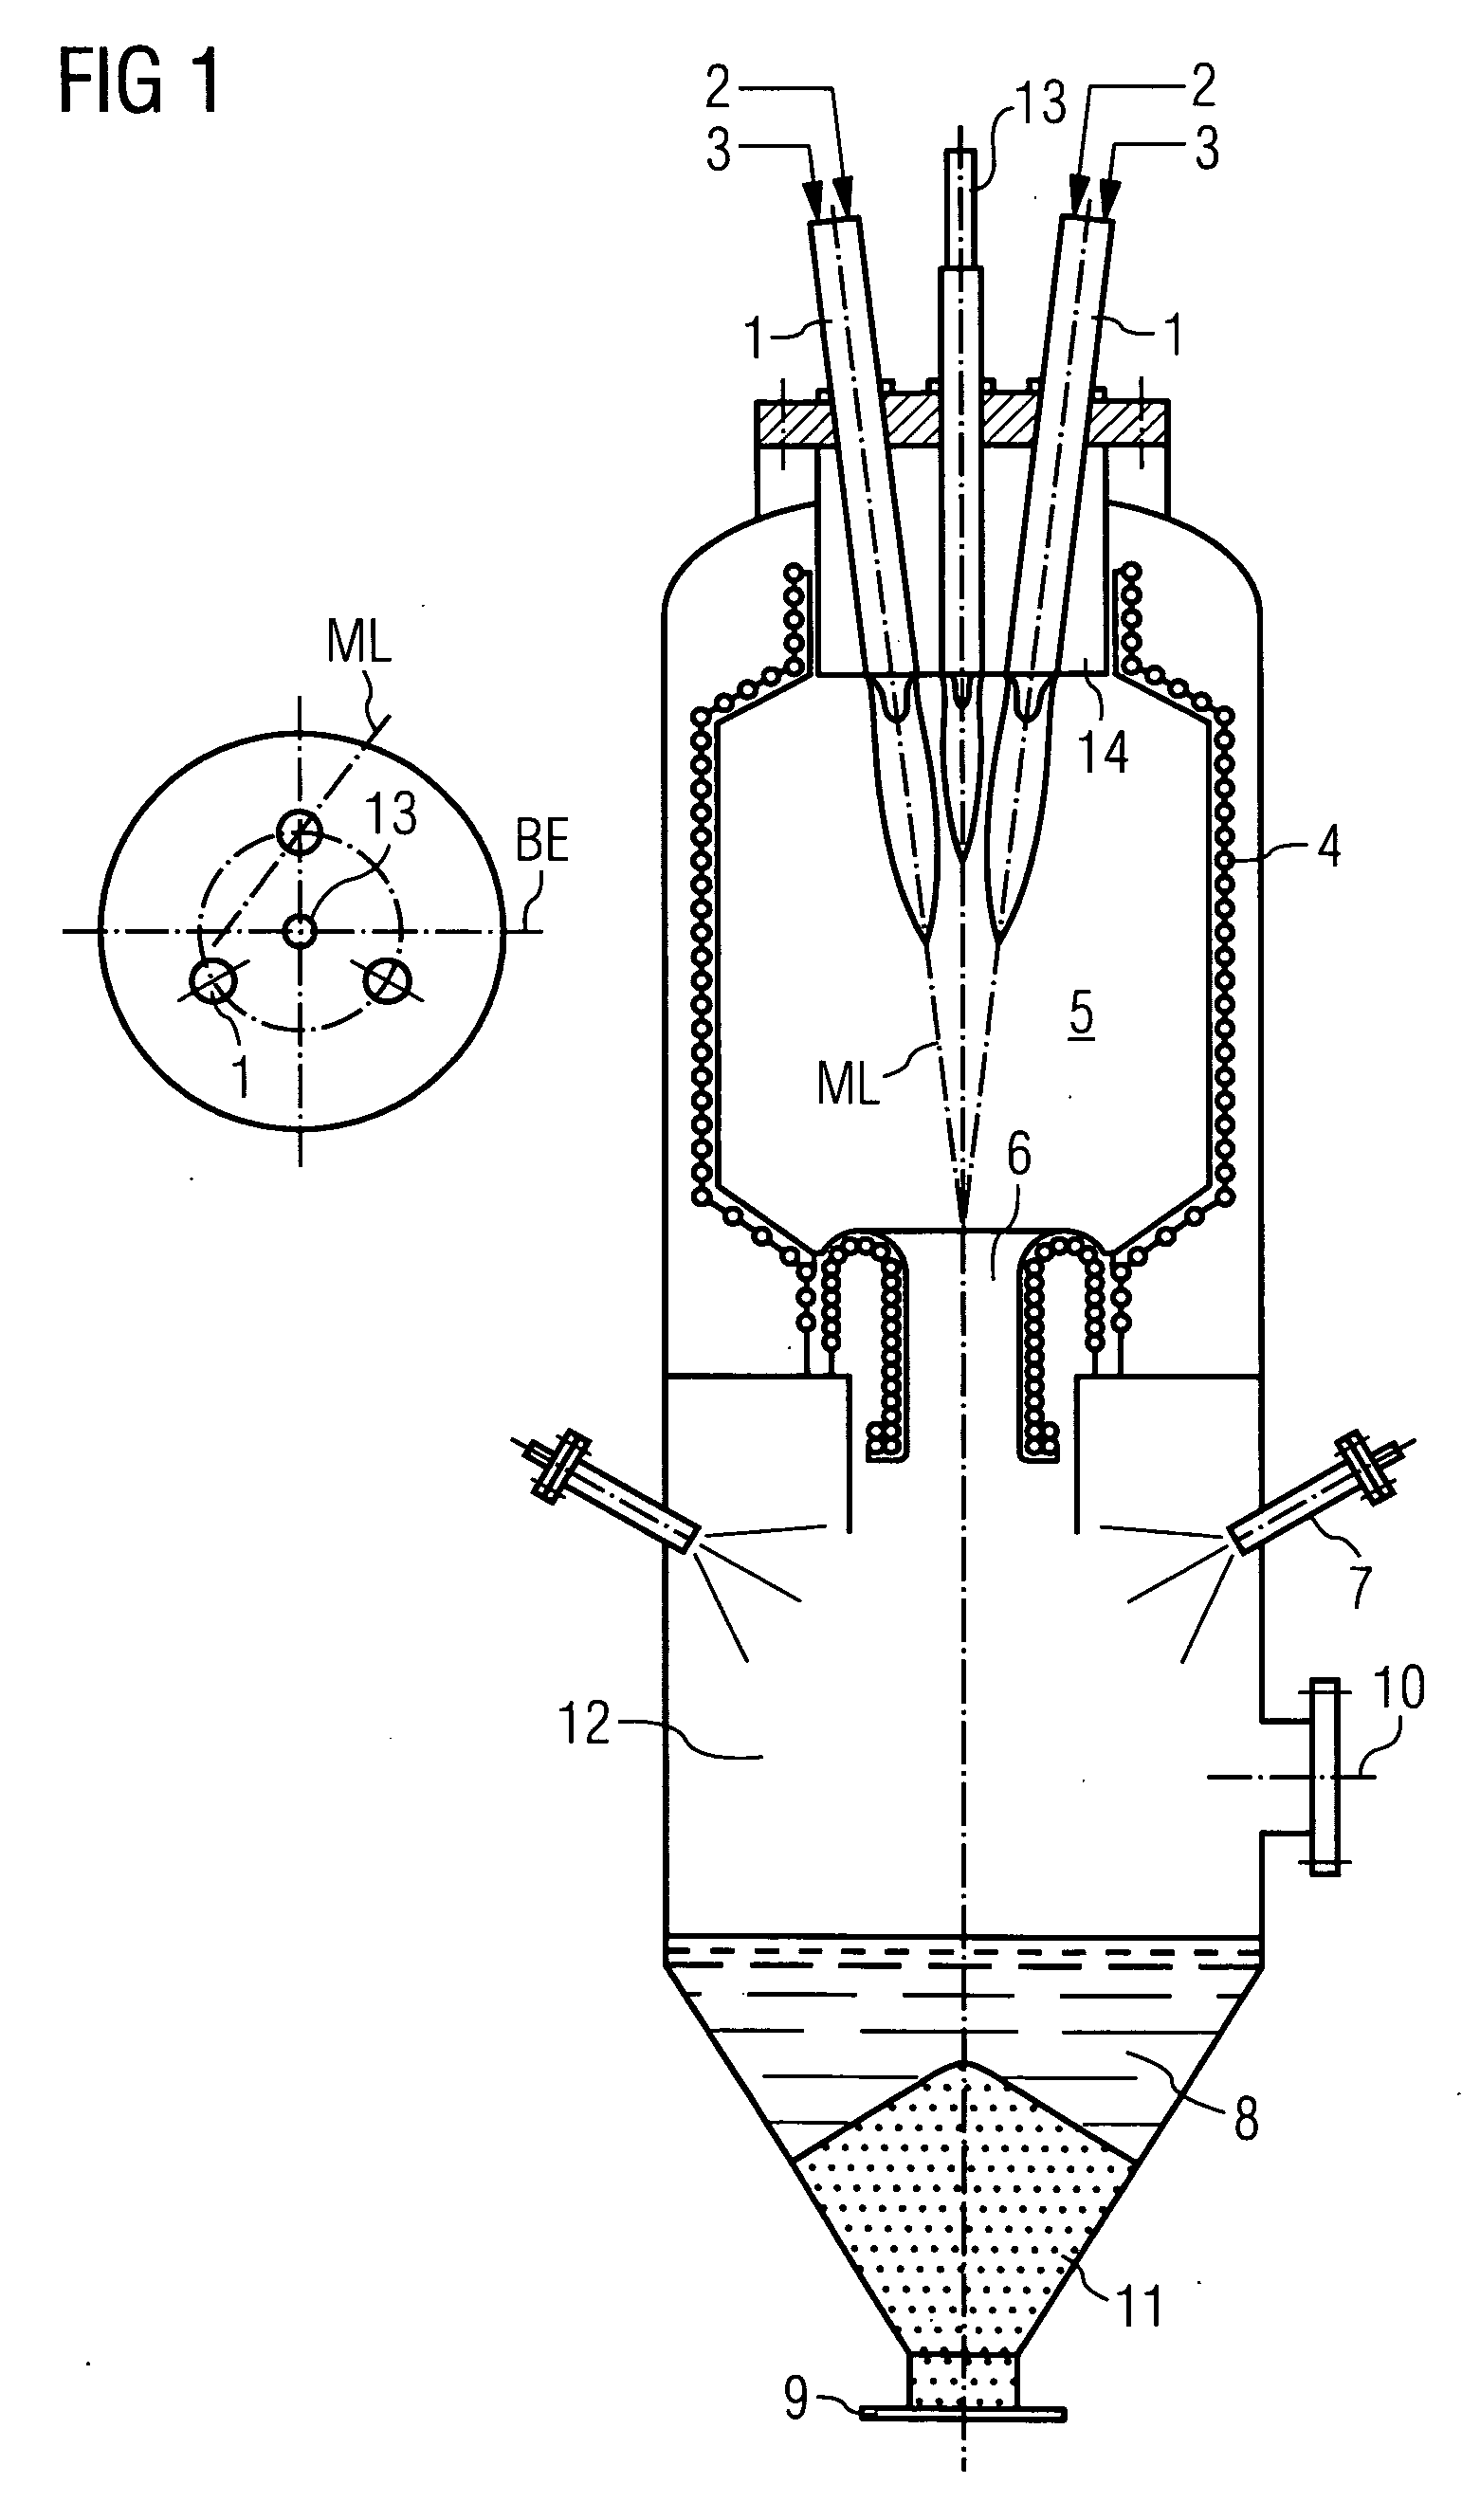 Entrained flow reactor for gasifying solid and liquid energy sources